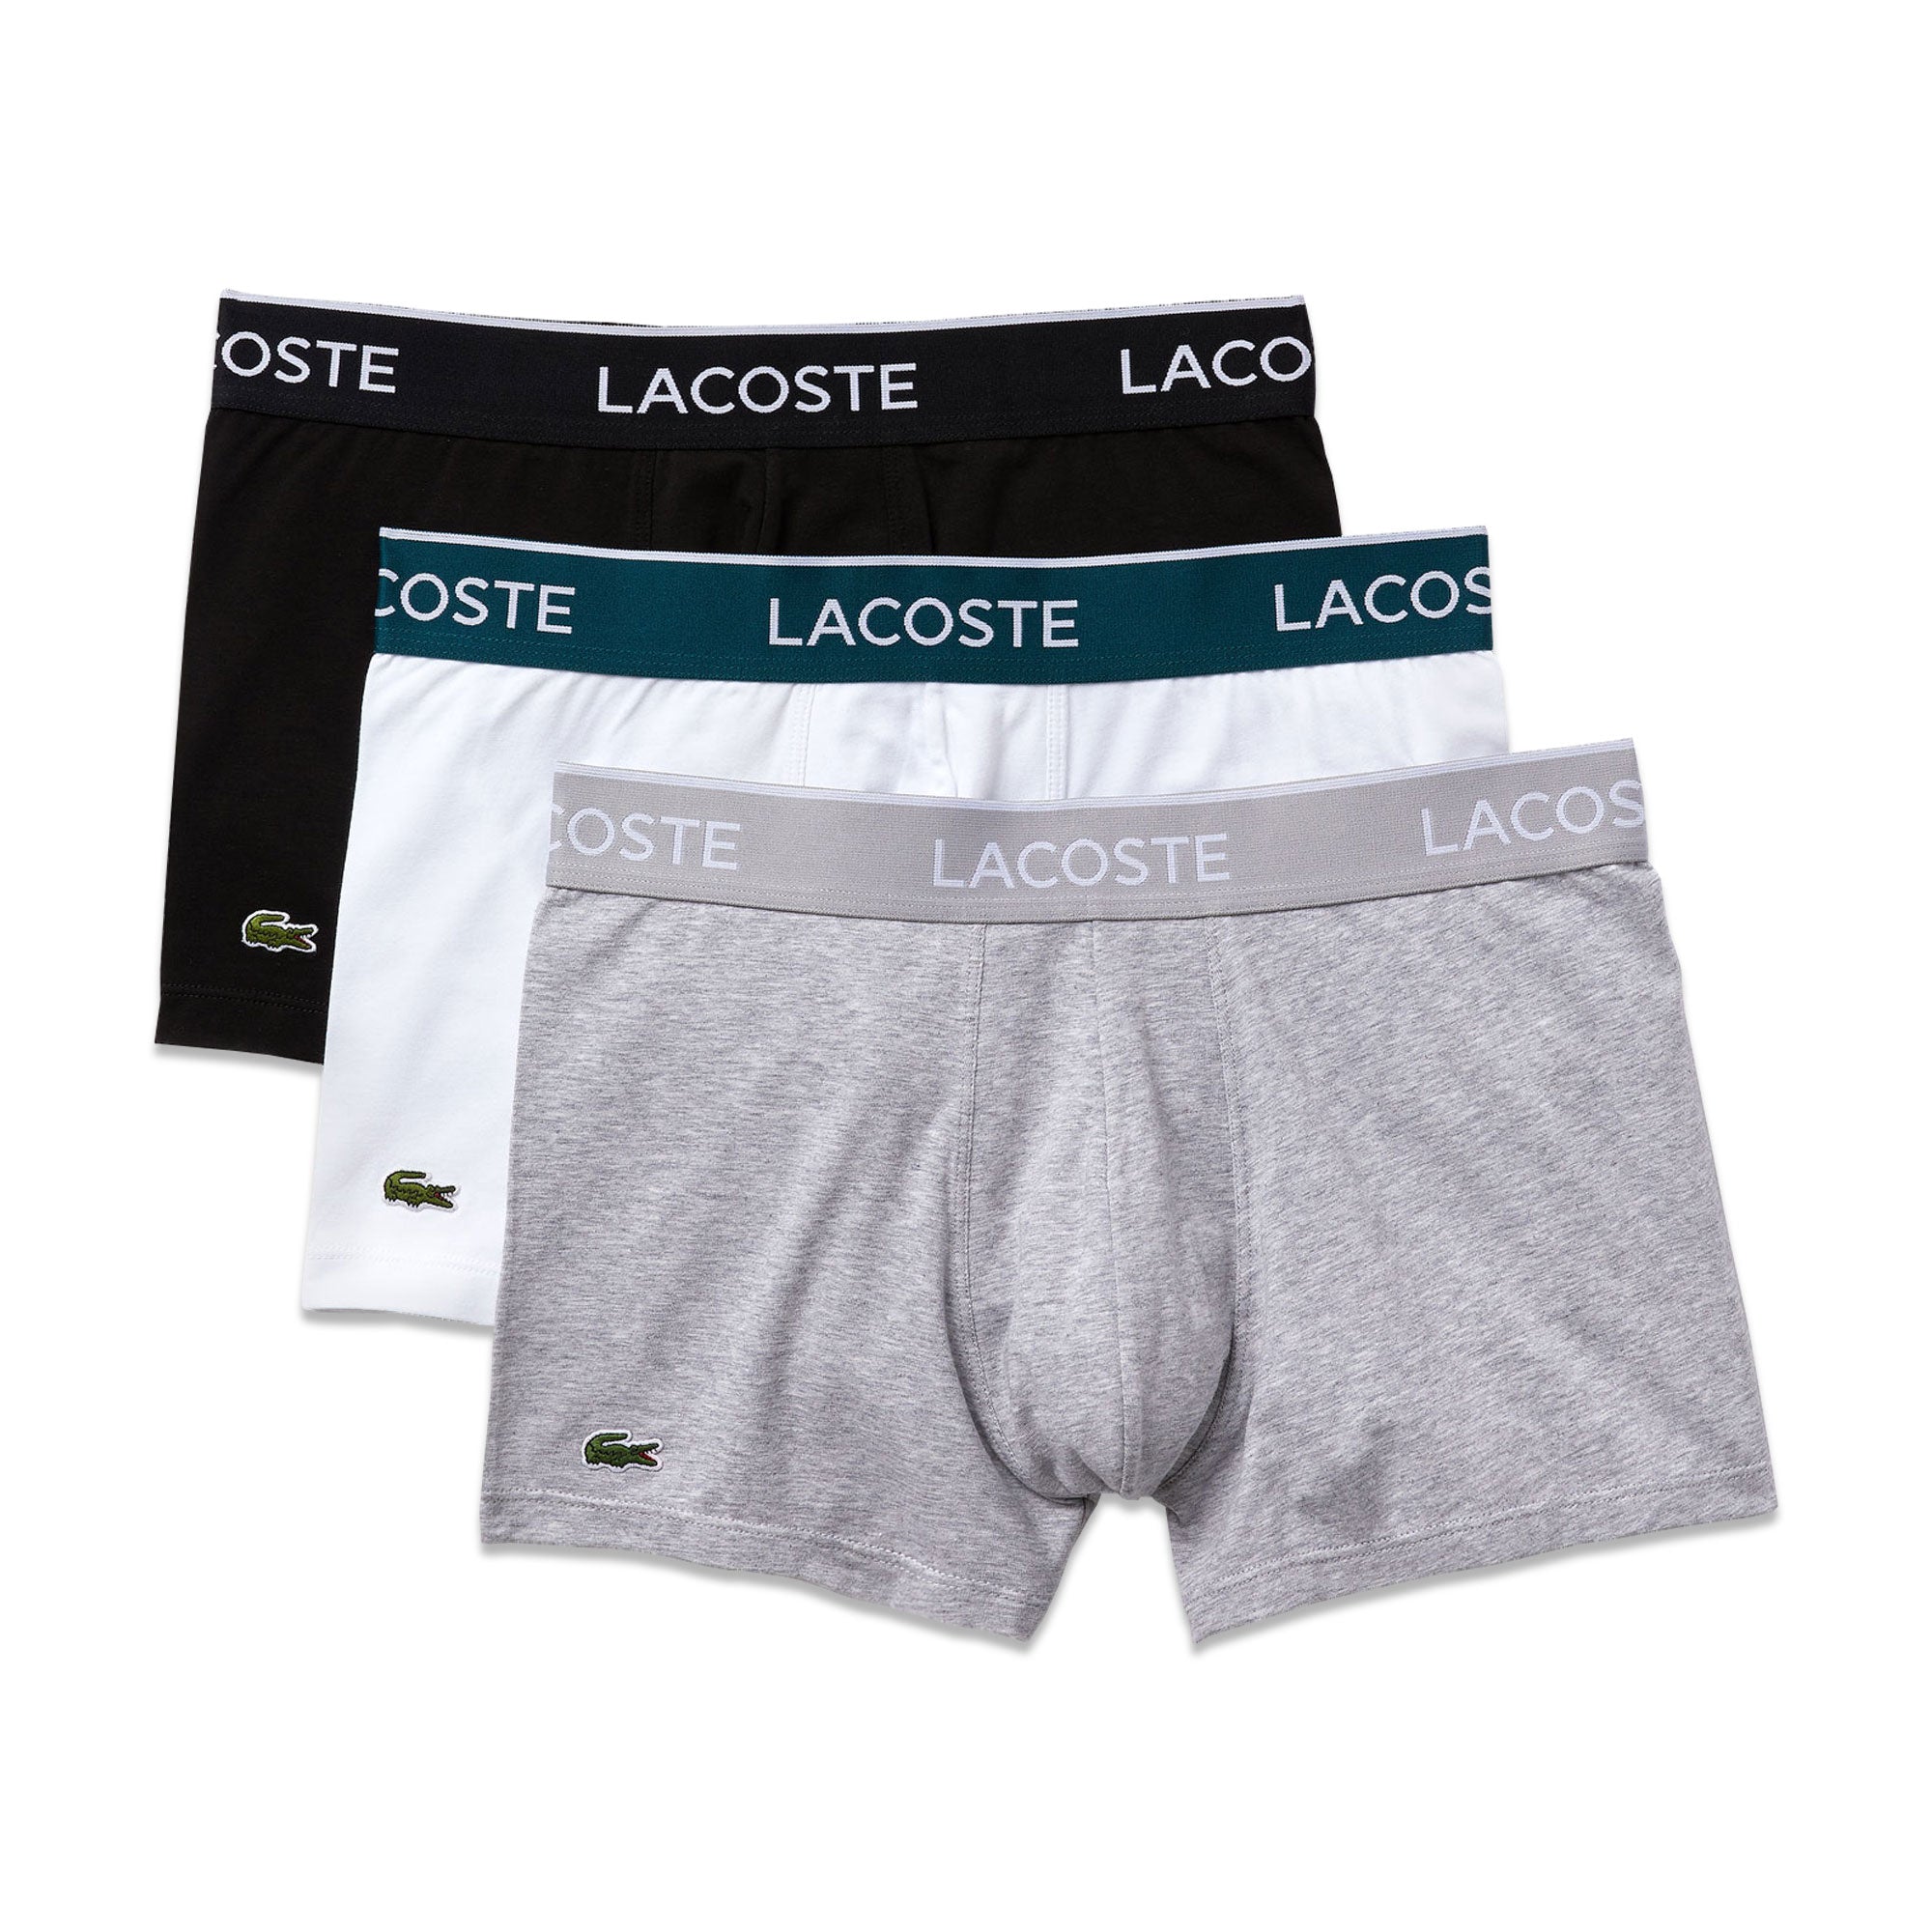 Lacoste 3 Pack Cotton Stretch Trunks - Black/White/Grey